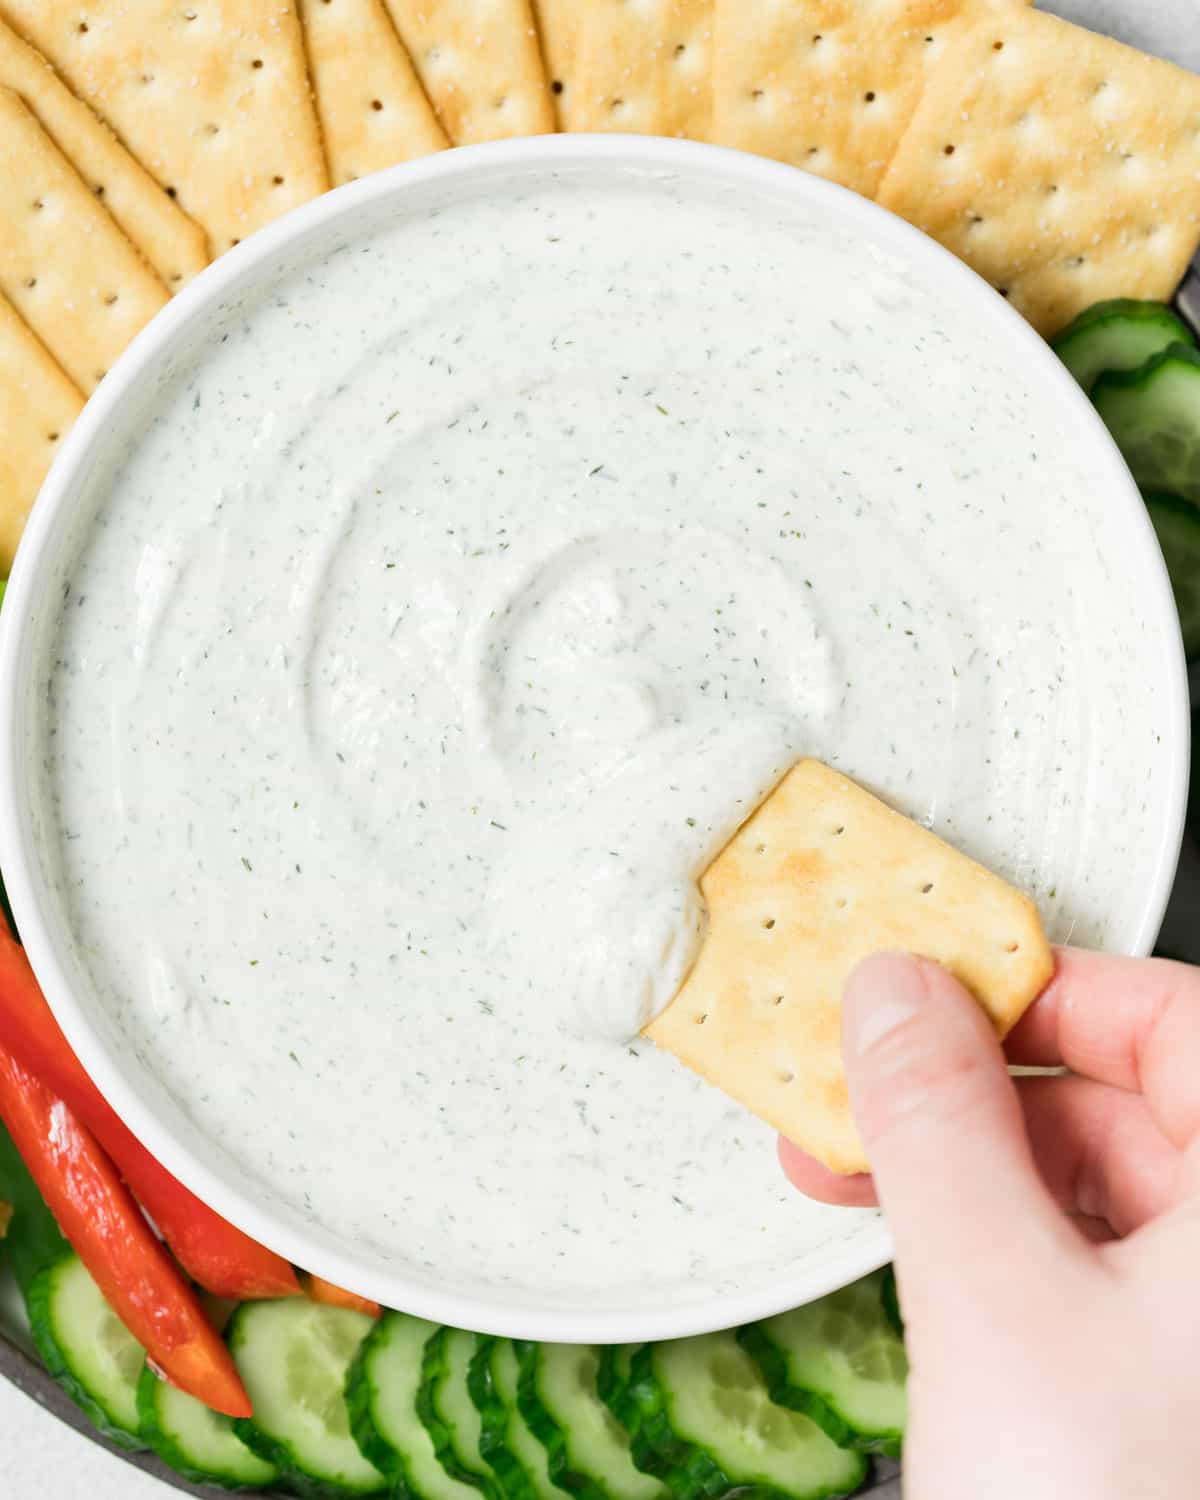 Dipping cracker into cottage cheese ranch dip.